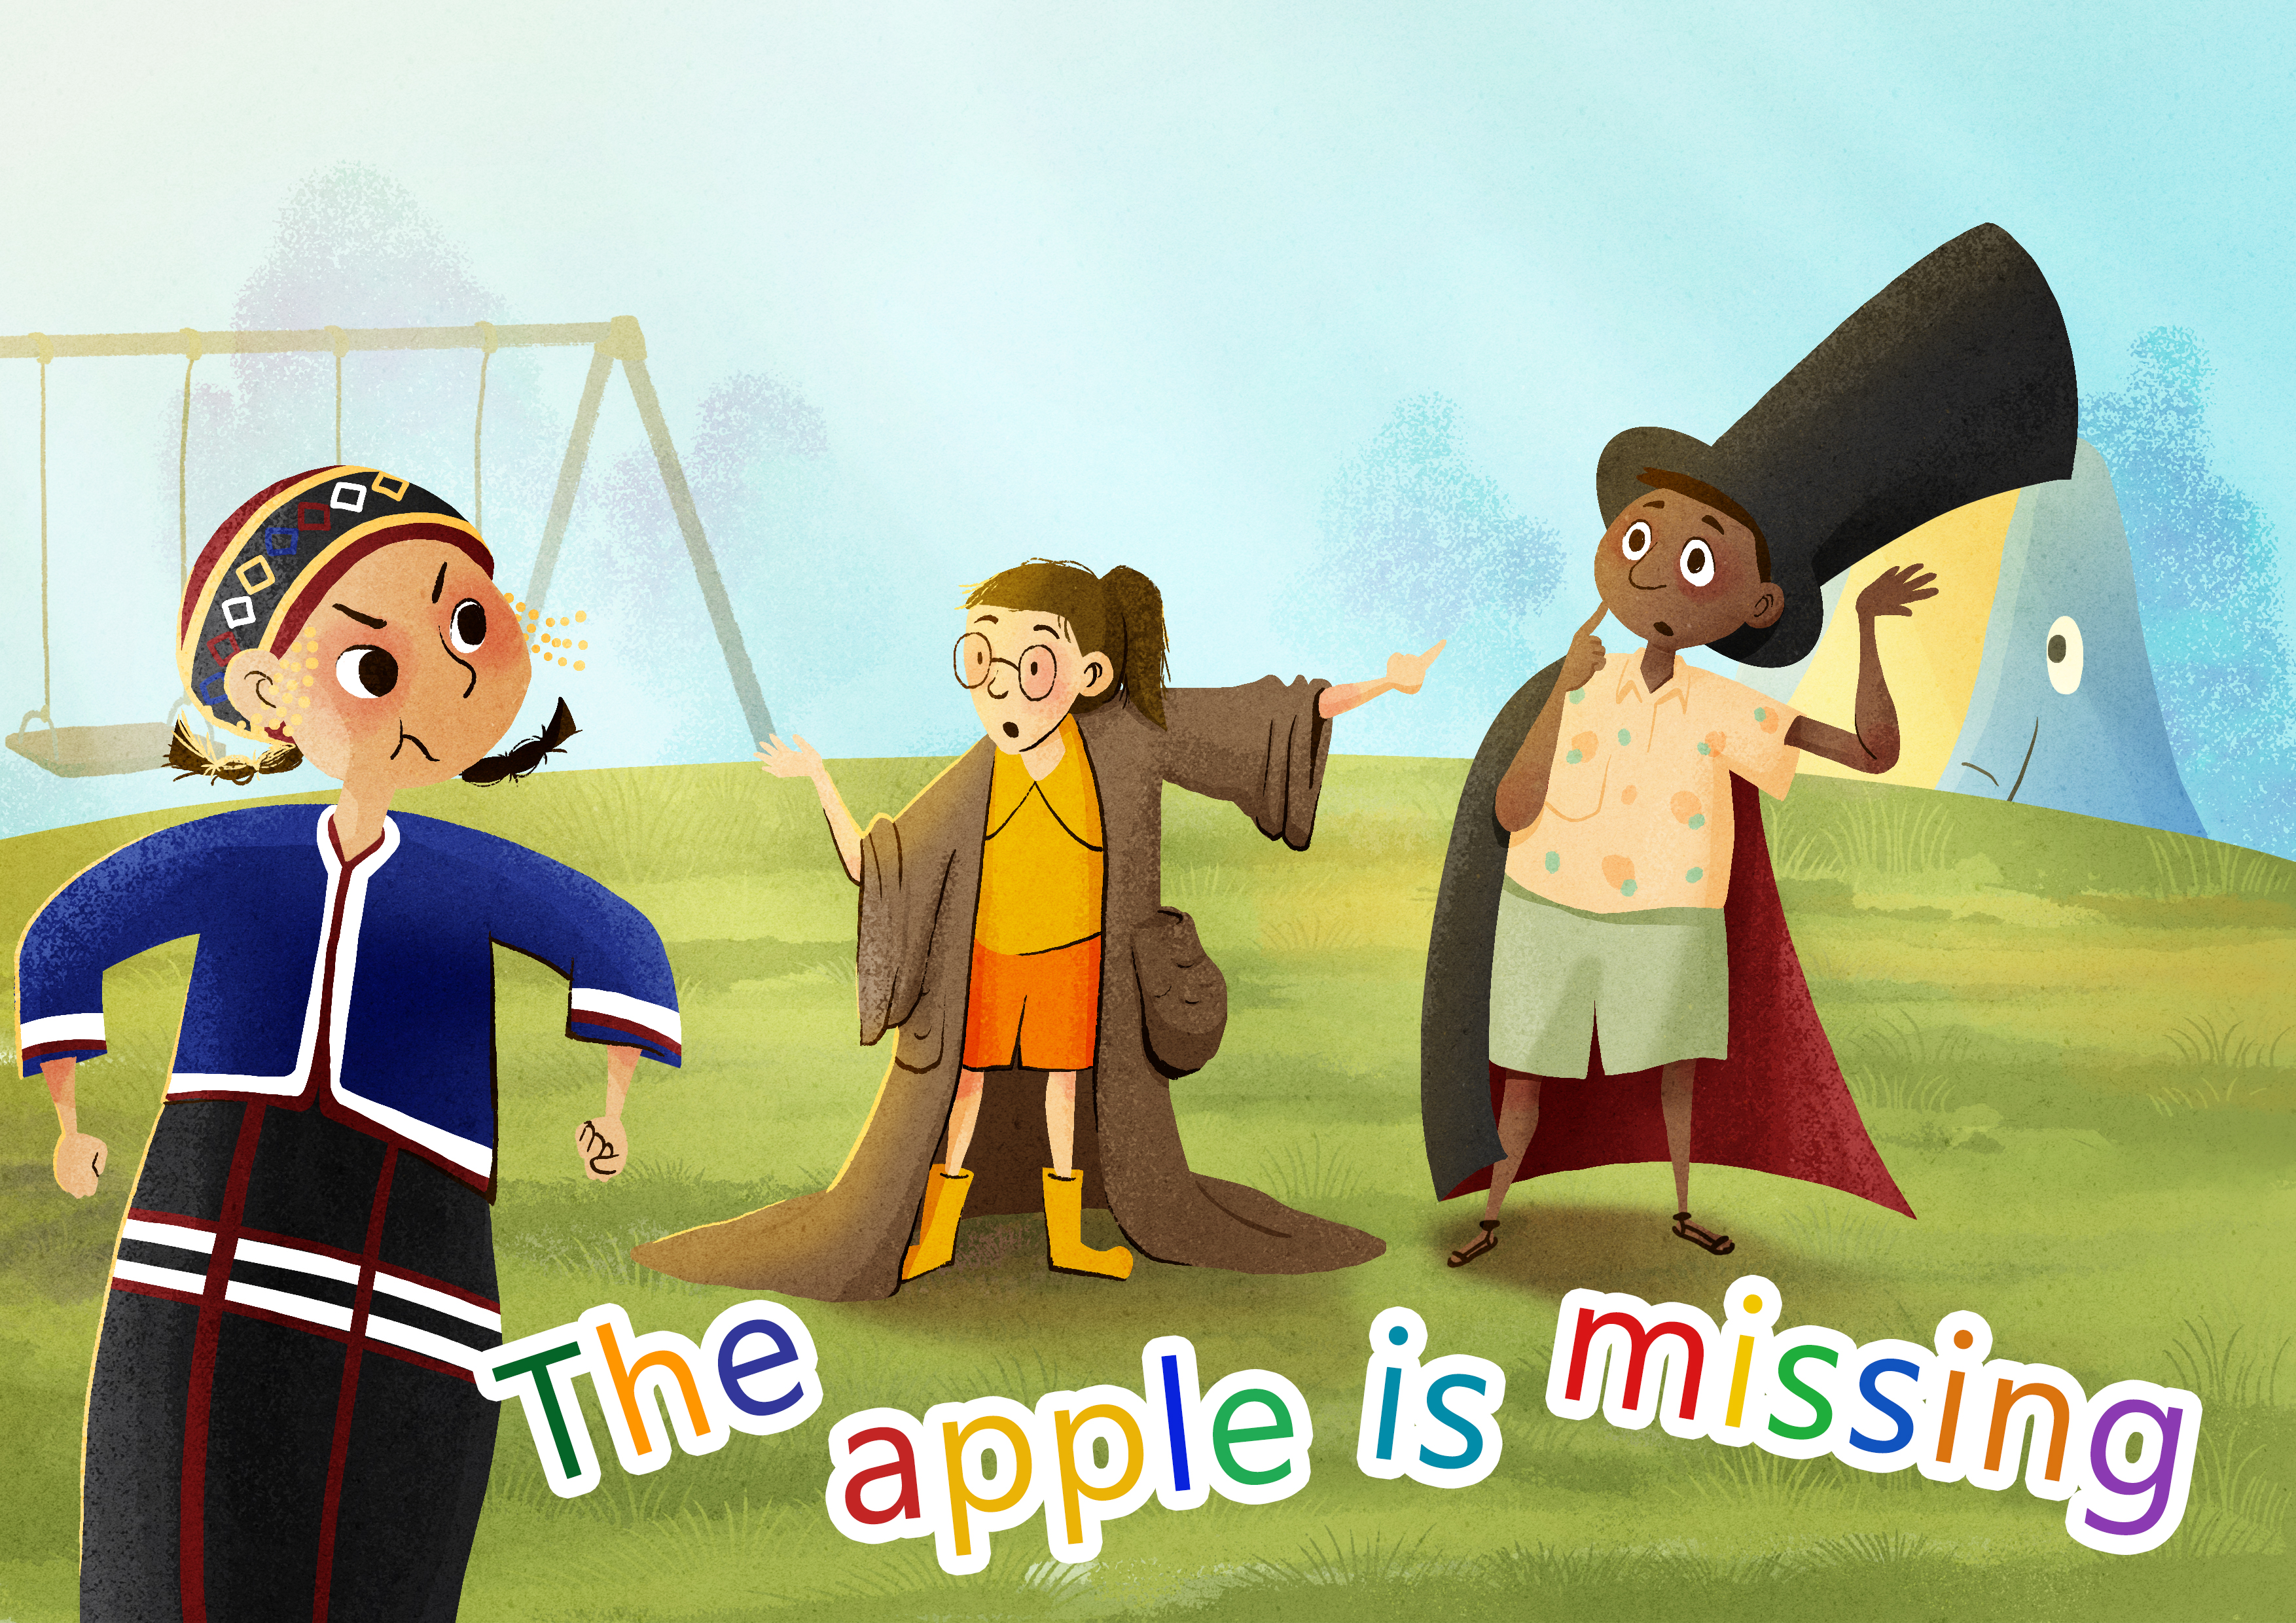 The apple is missing